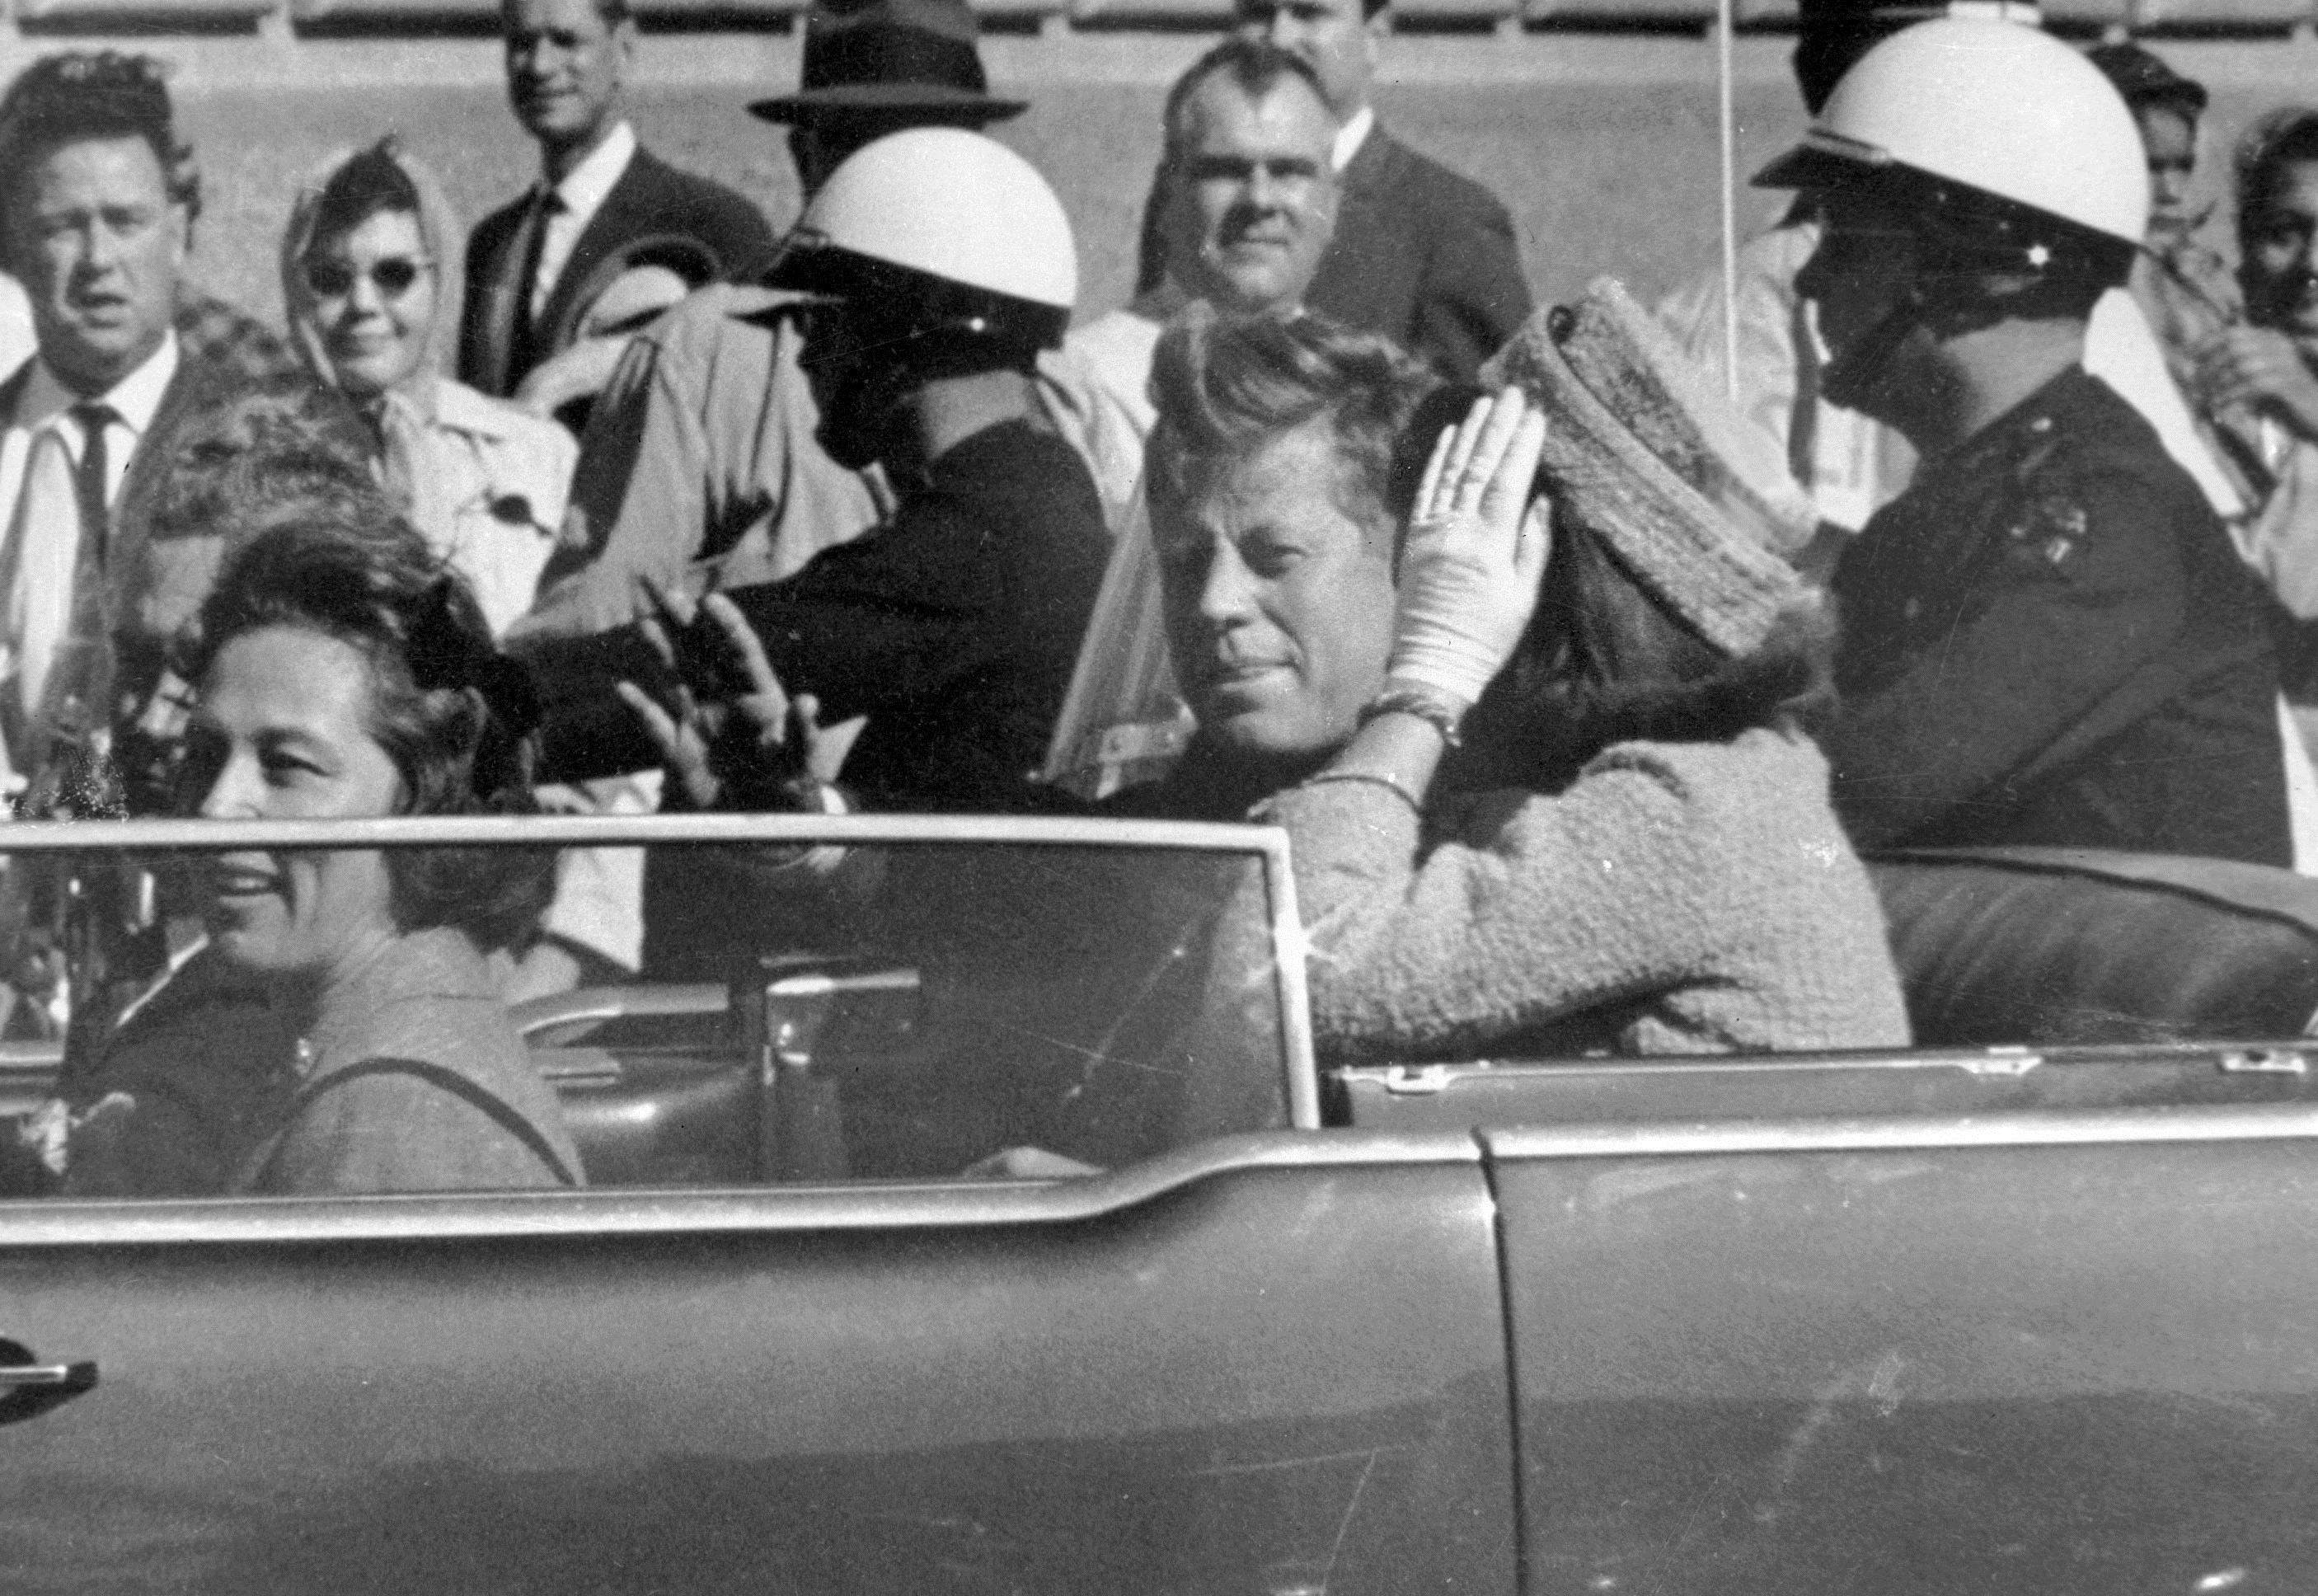 On Nov. 22, 1963, President John F. Kennedy waves from his car in a motorcade approximately one minute before he was shot in Dallas. (Jim Altgens—AP)